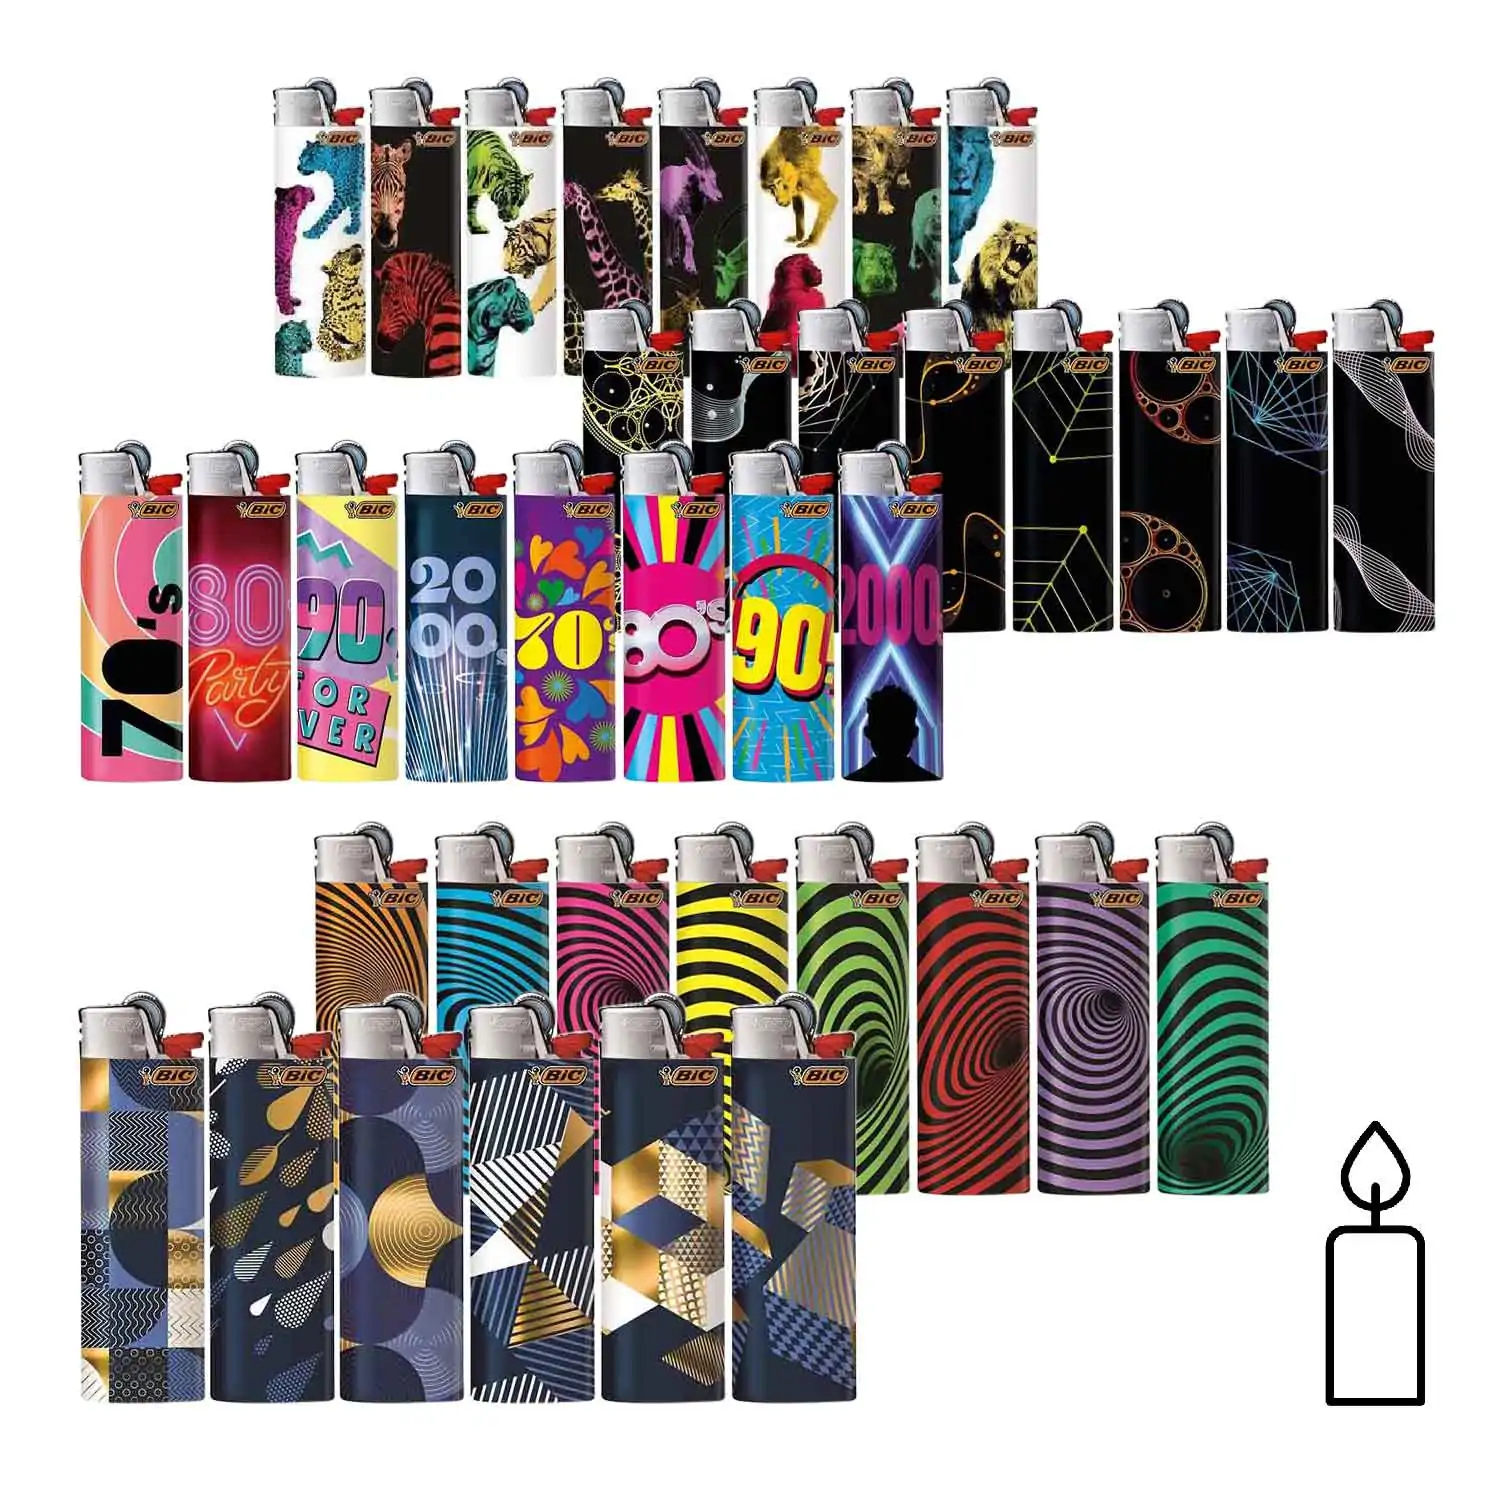 Bic maxi lighter decorated - Buy at Real Tobacco